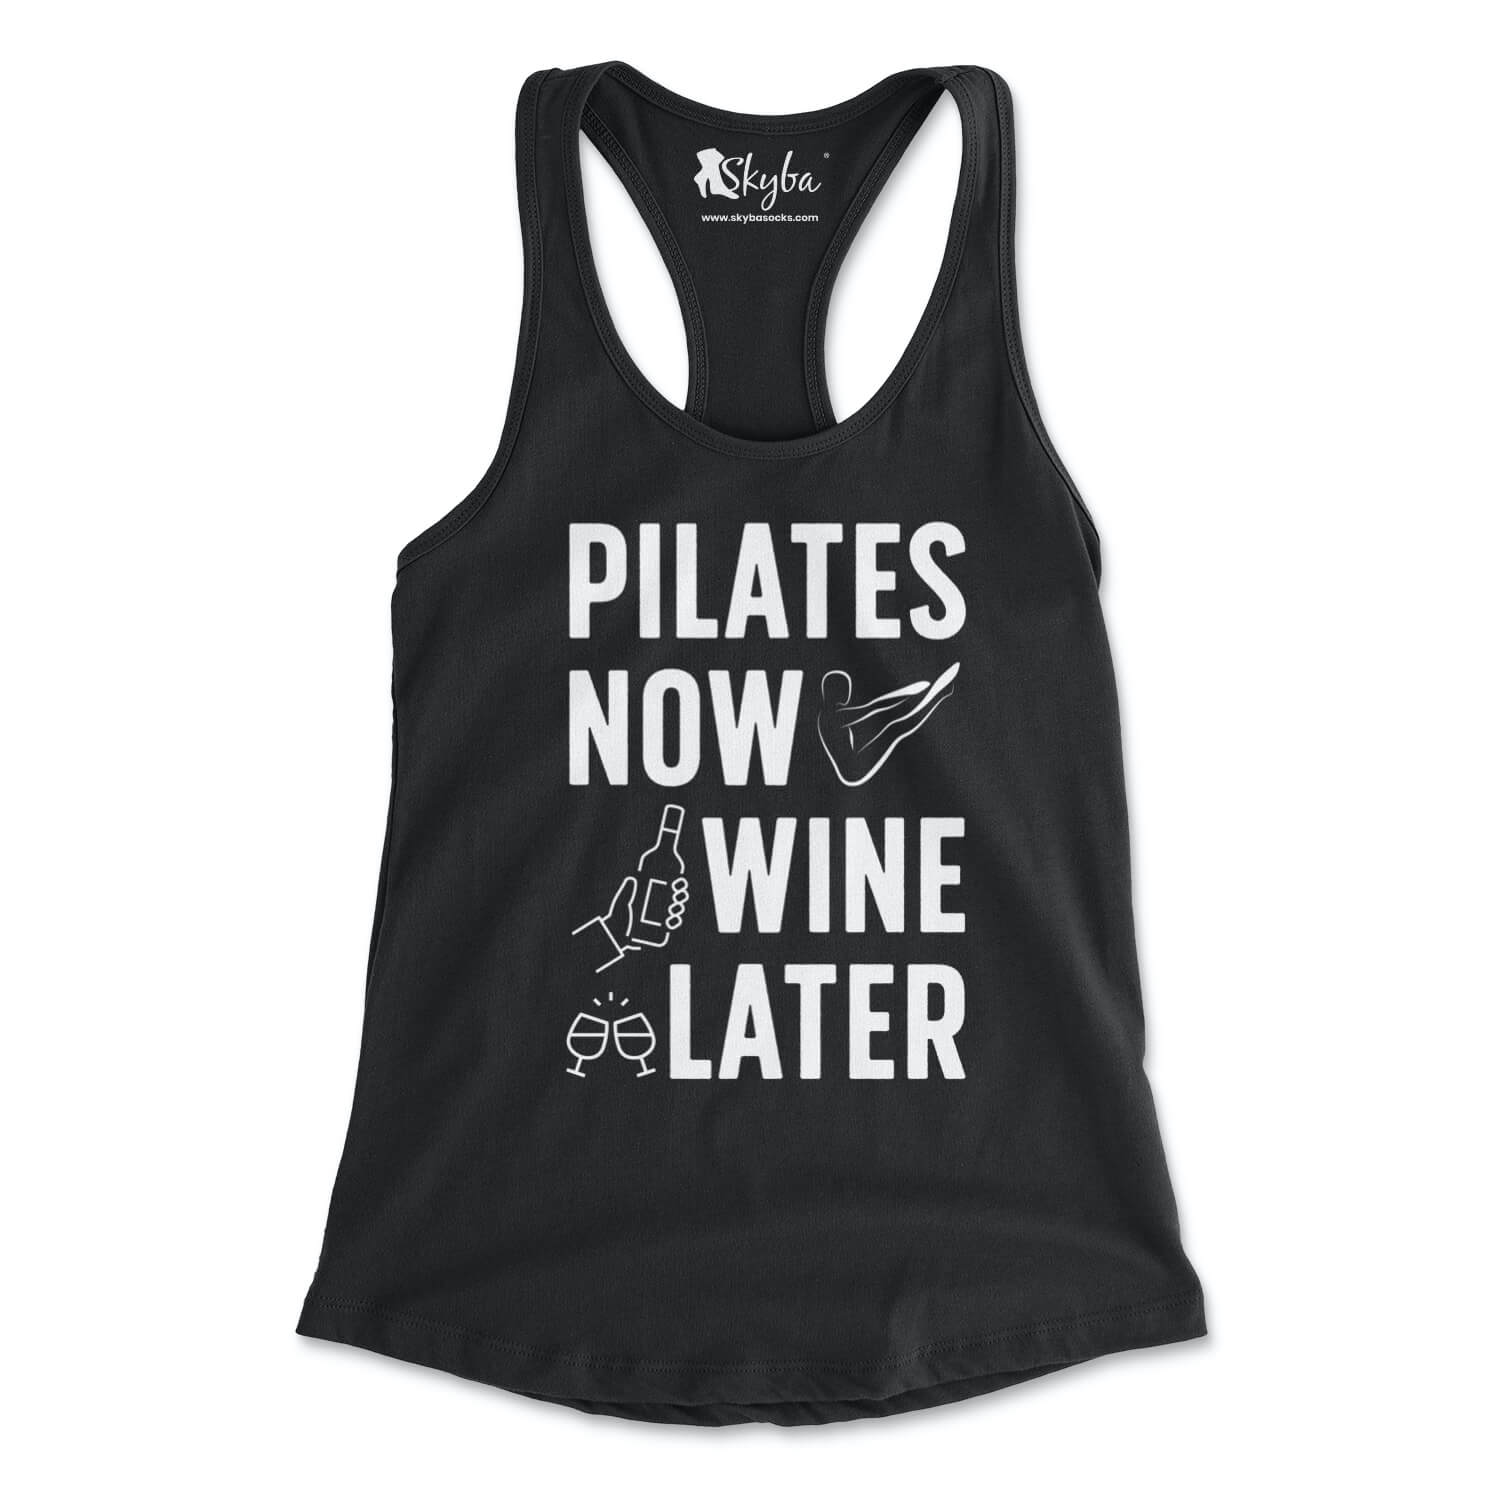 Pilates Now Wine Later - Women's Slim Fit Tank Skyba Tank Top